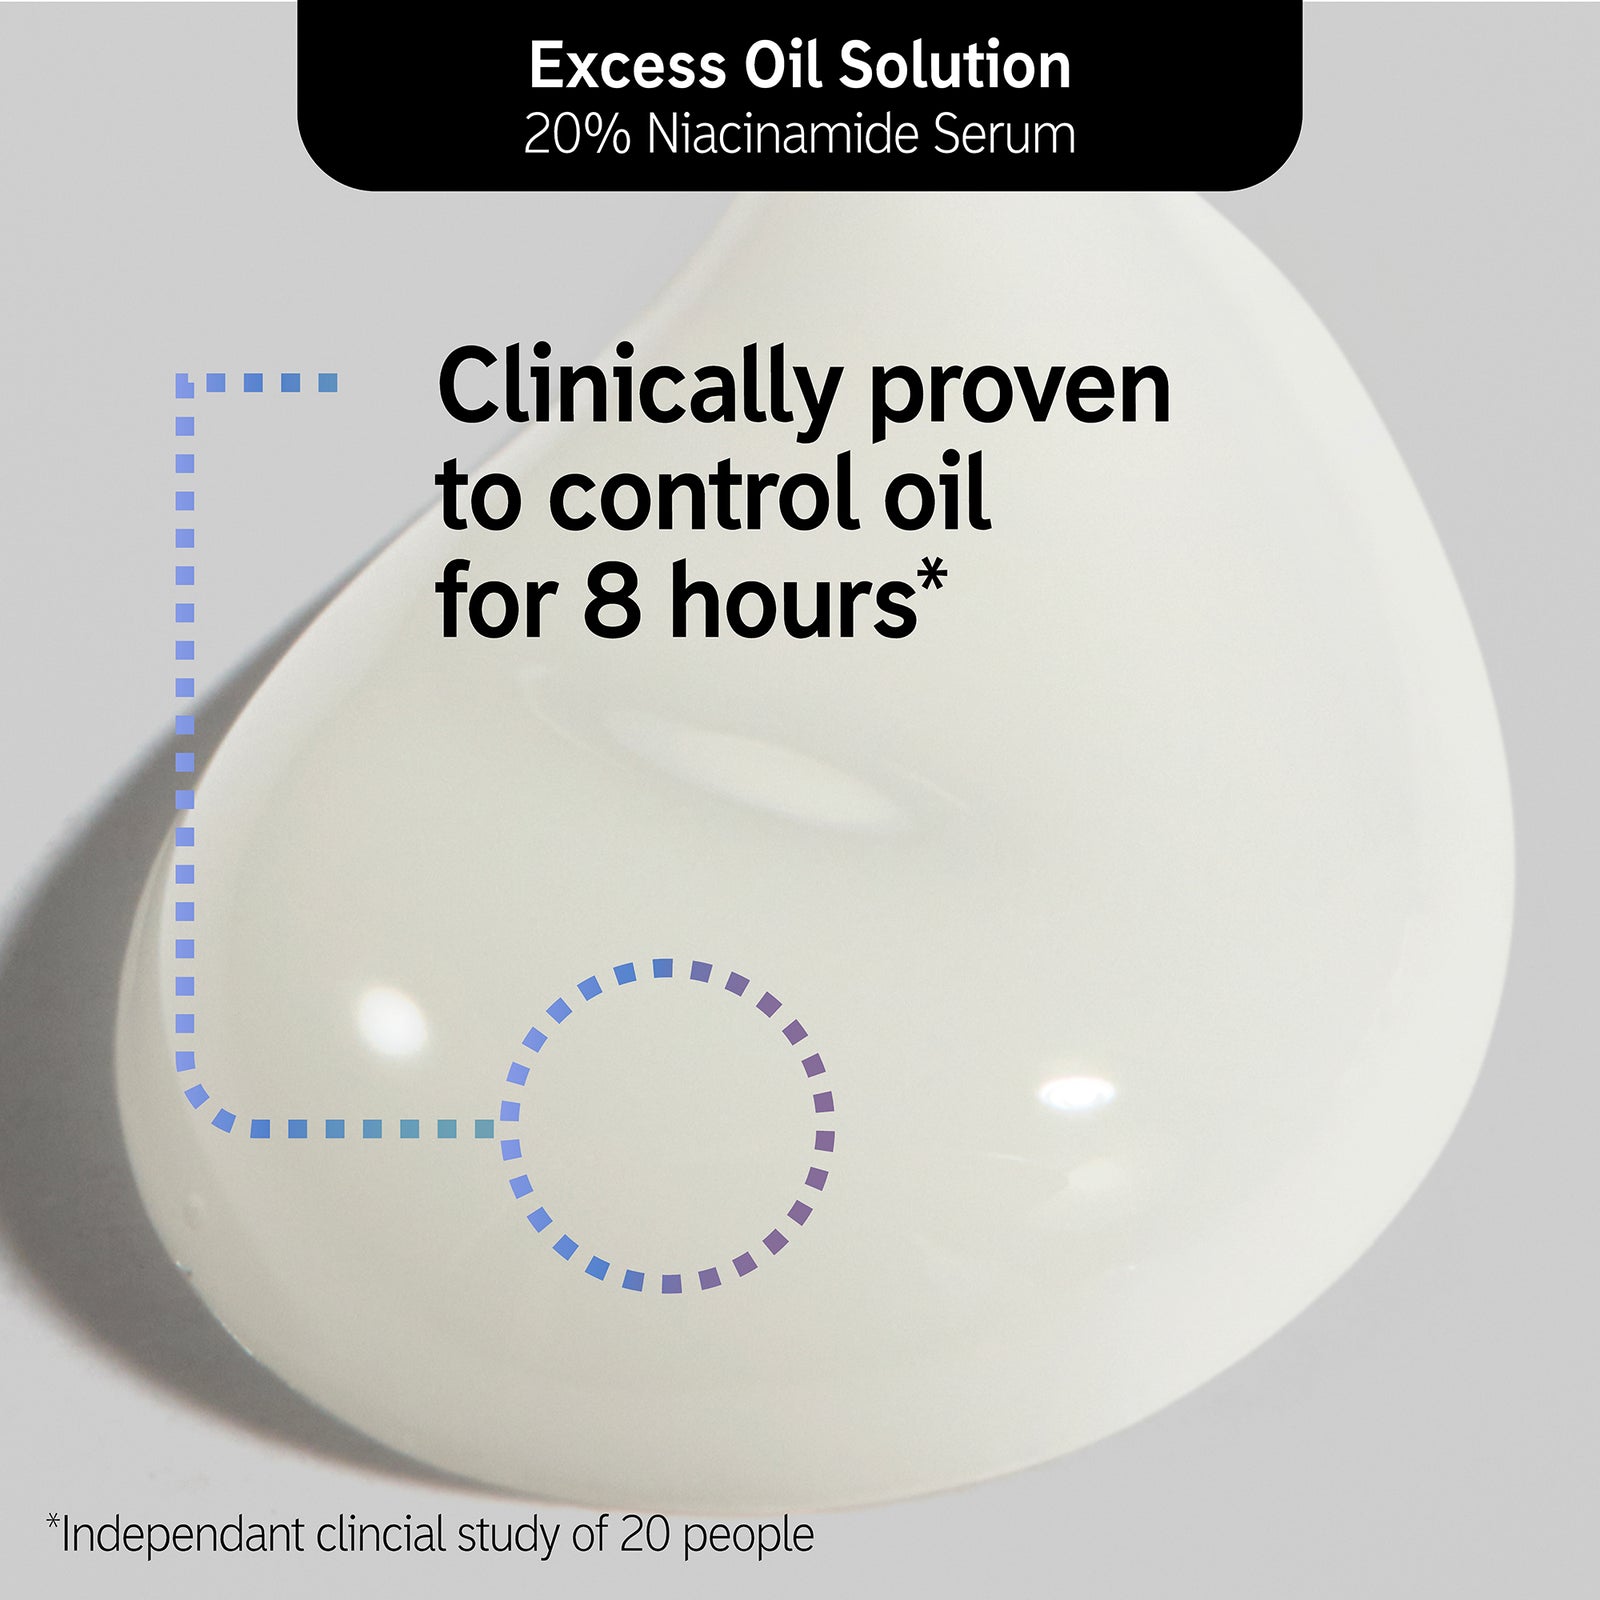 Excess Oil & Pore Minimising Solution Routine goop shot annotated with a statistic about oil control